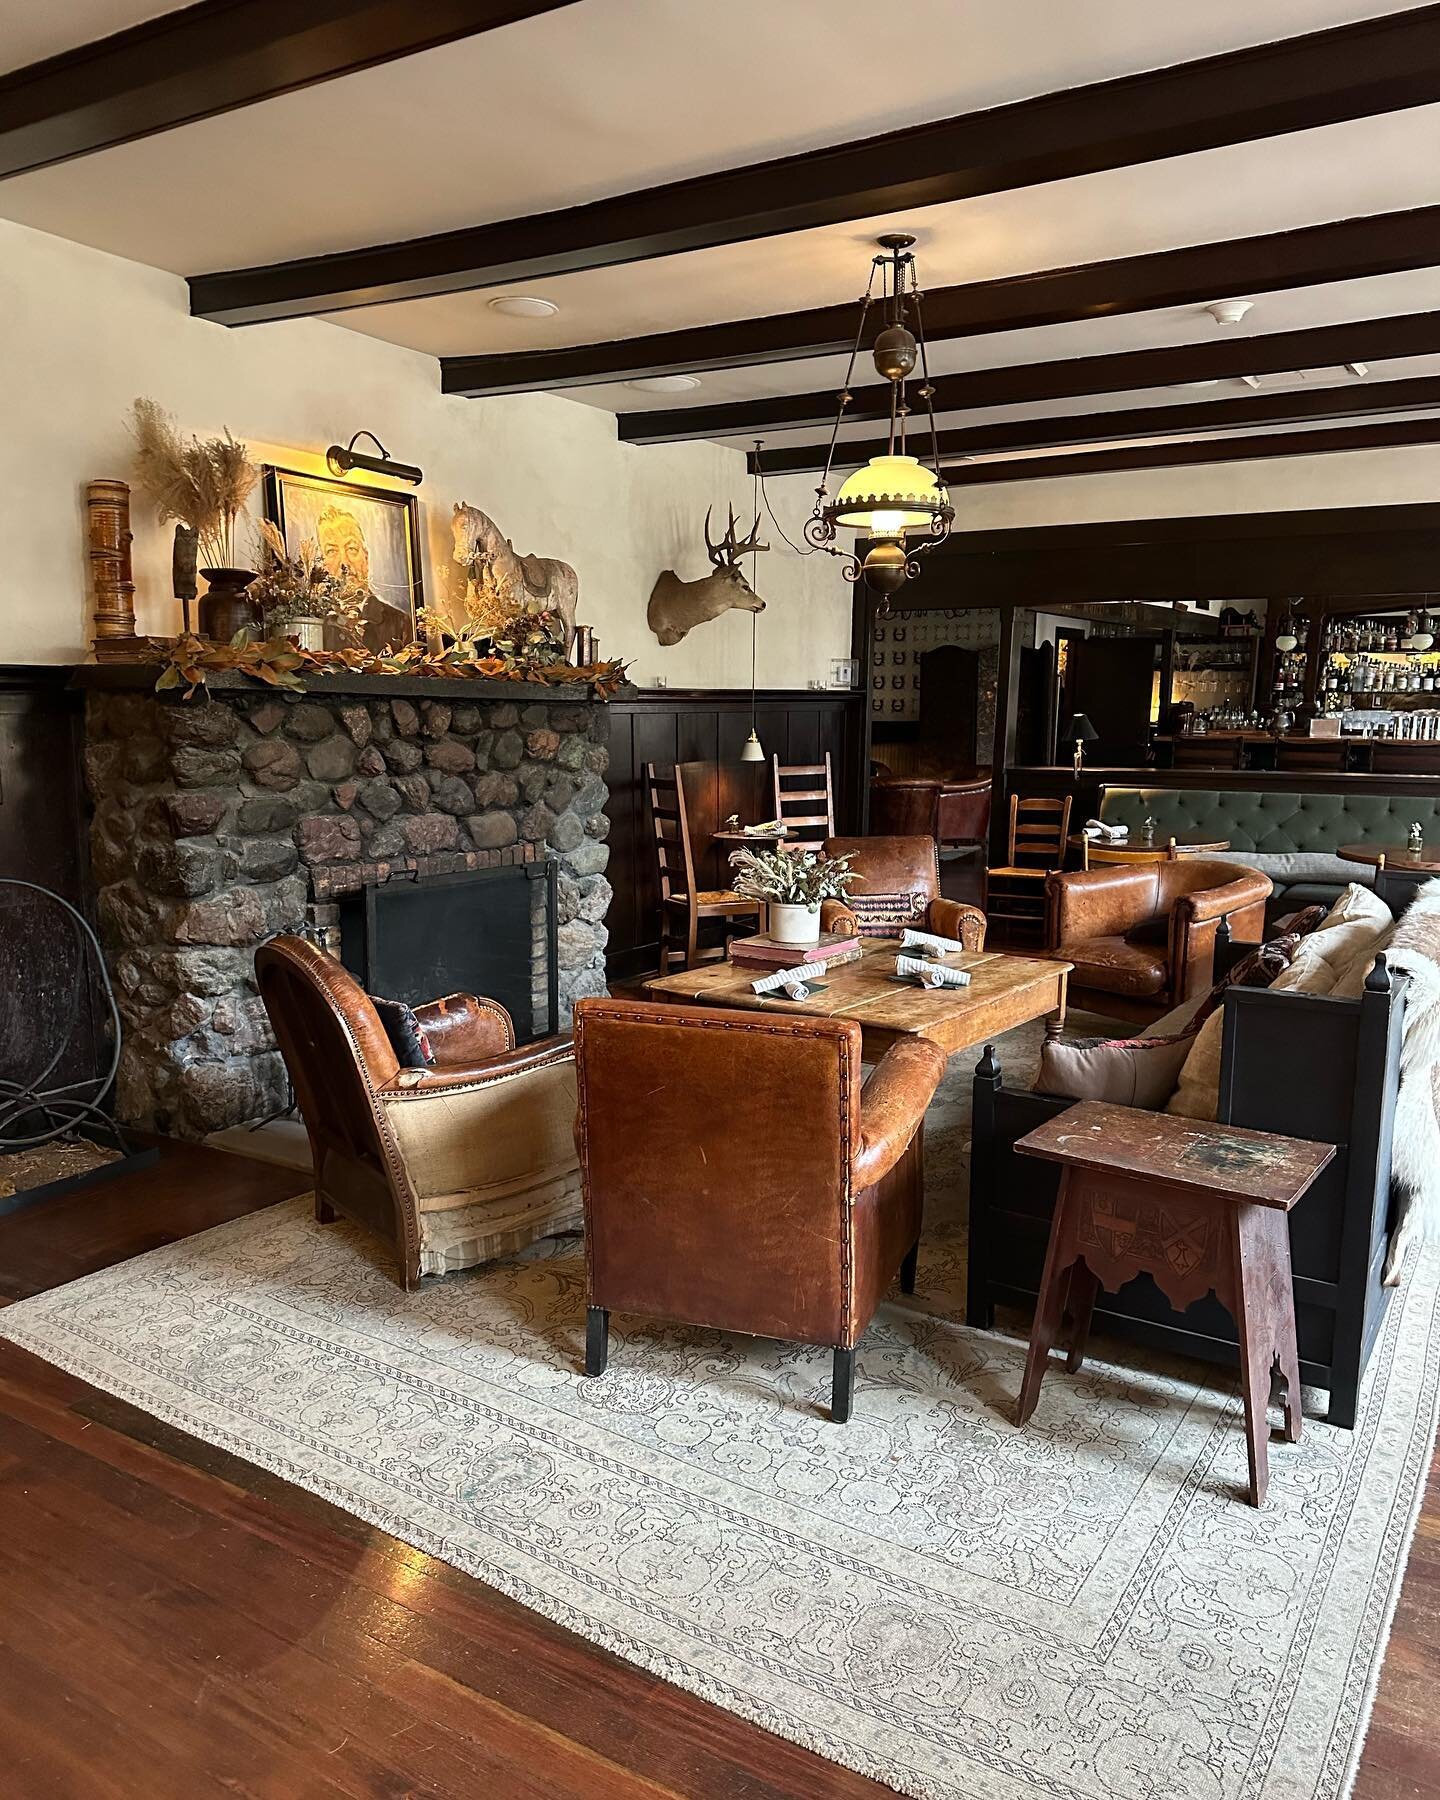 Made a quick holiday trip to stay at @matteistavernauberge in Los Olivos with my mom. Alice used to live here years ago and Mattei&rsquo;s was where we&rsquo;d meet for dinner with our boots still on. Glad to see they&rsquo;ve kept the cowboy vibe ev